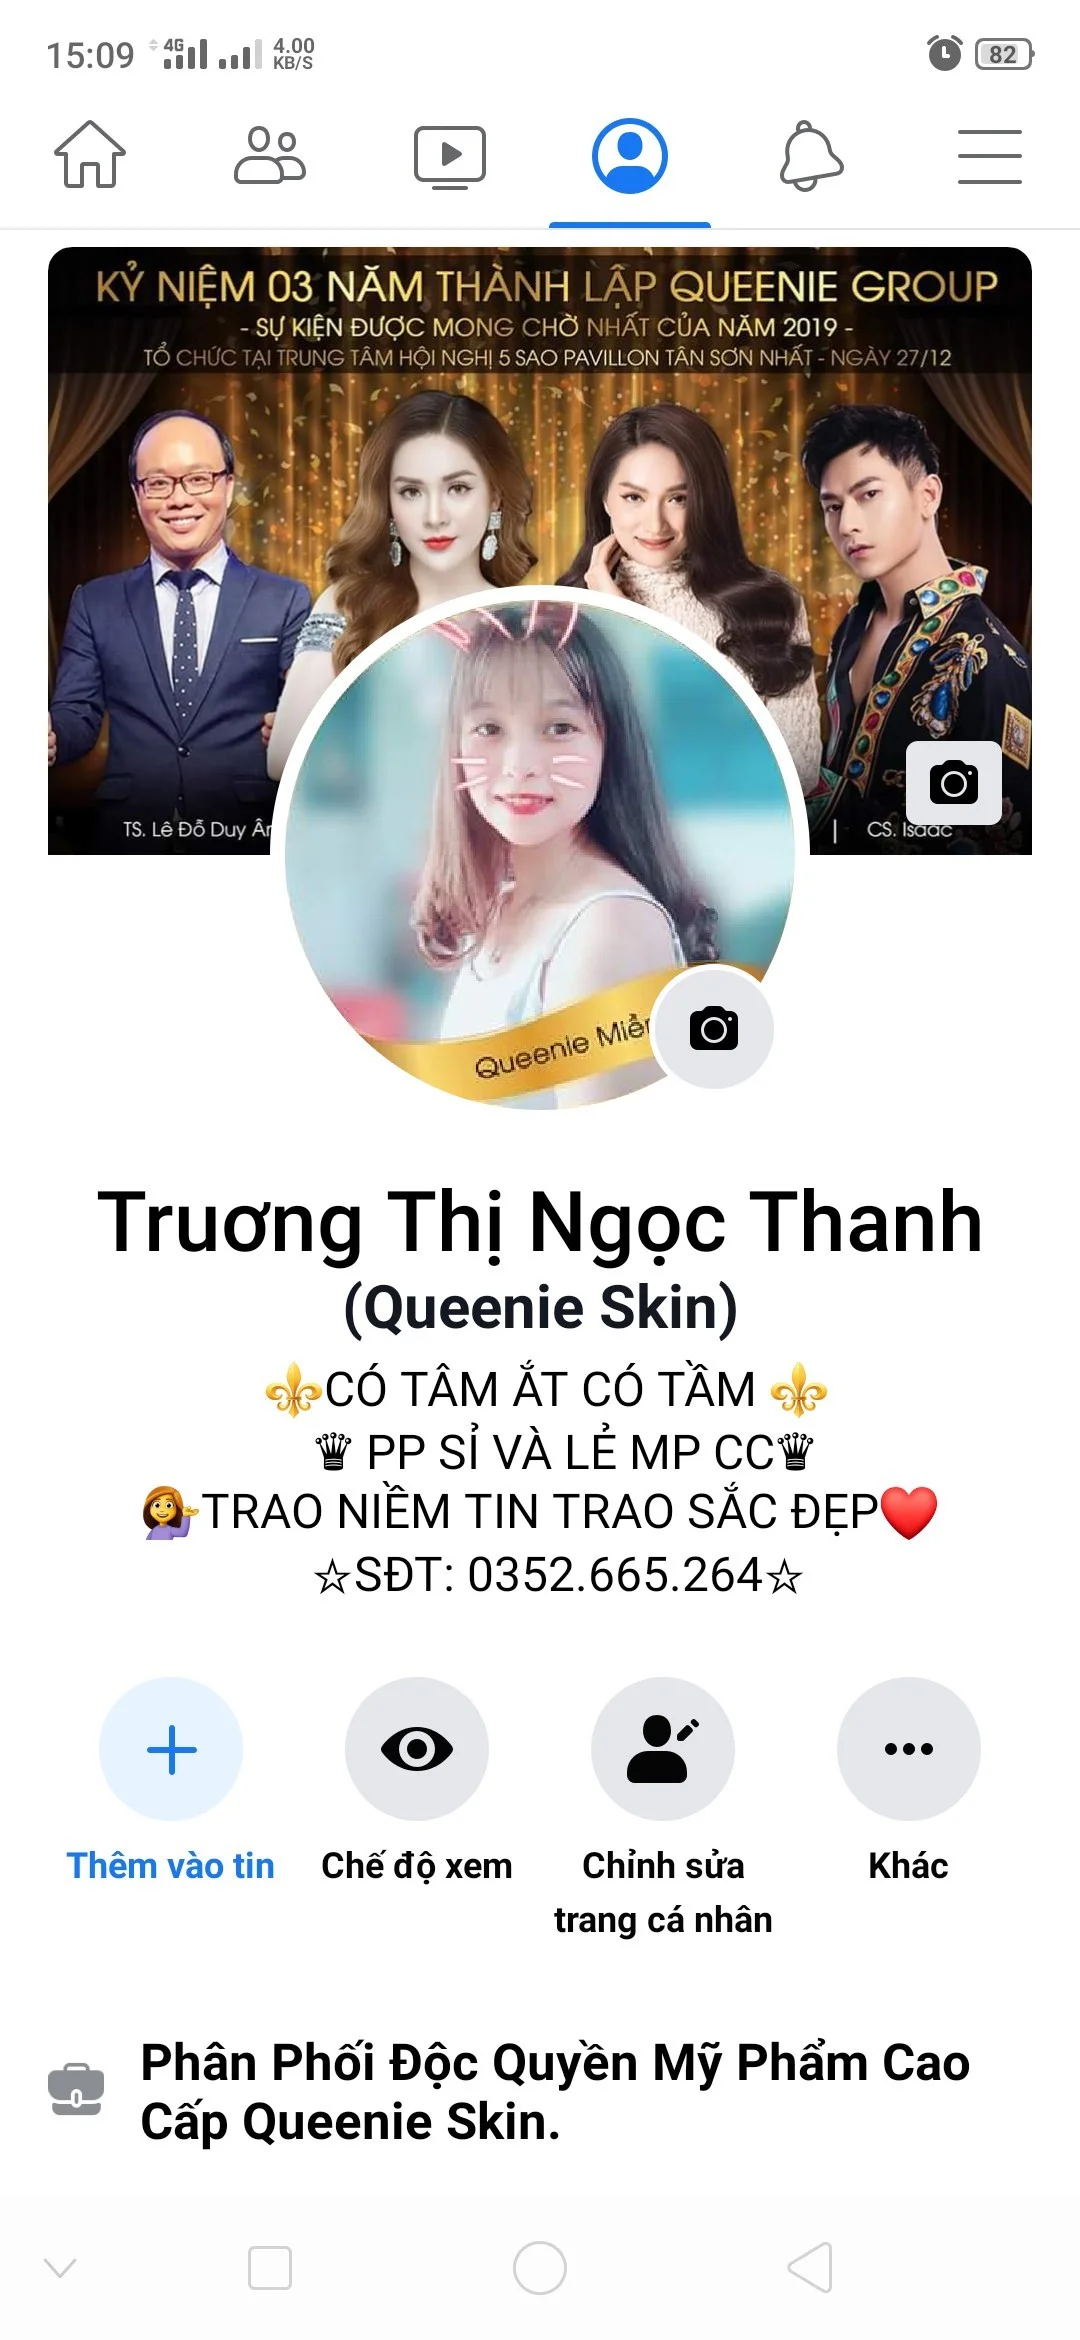 Ngọc Thanh's cover photo